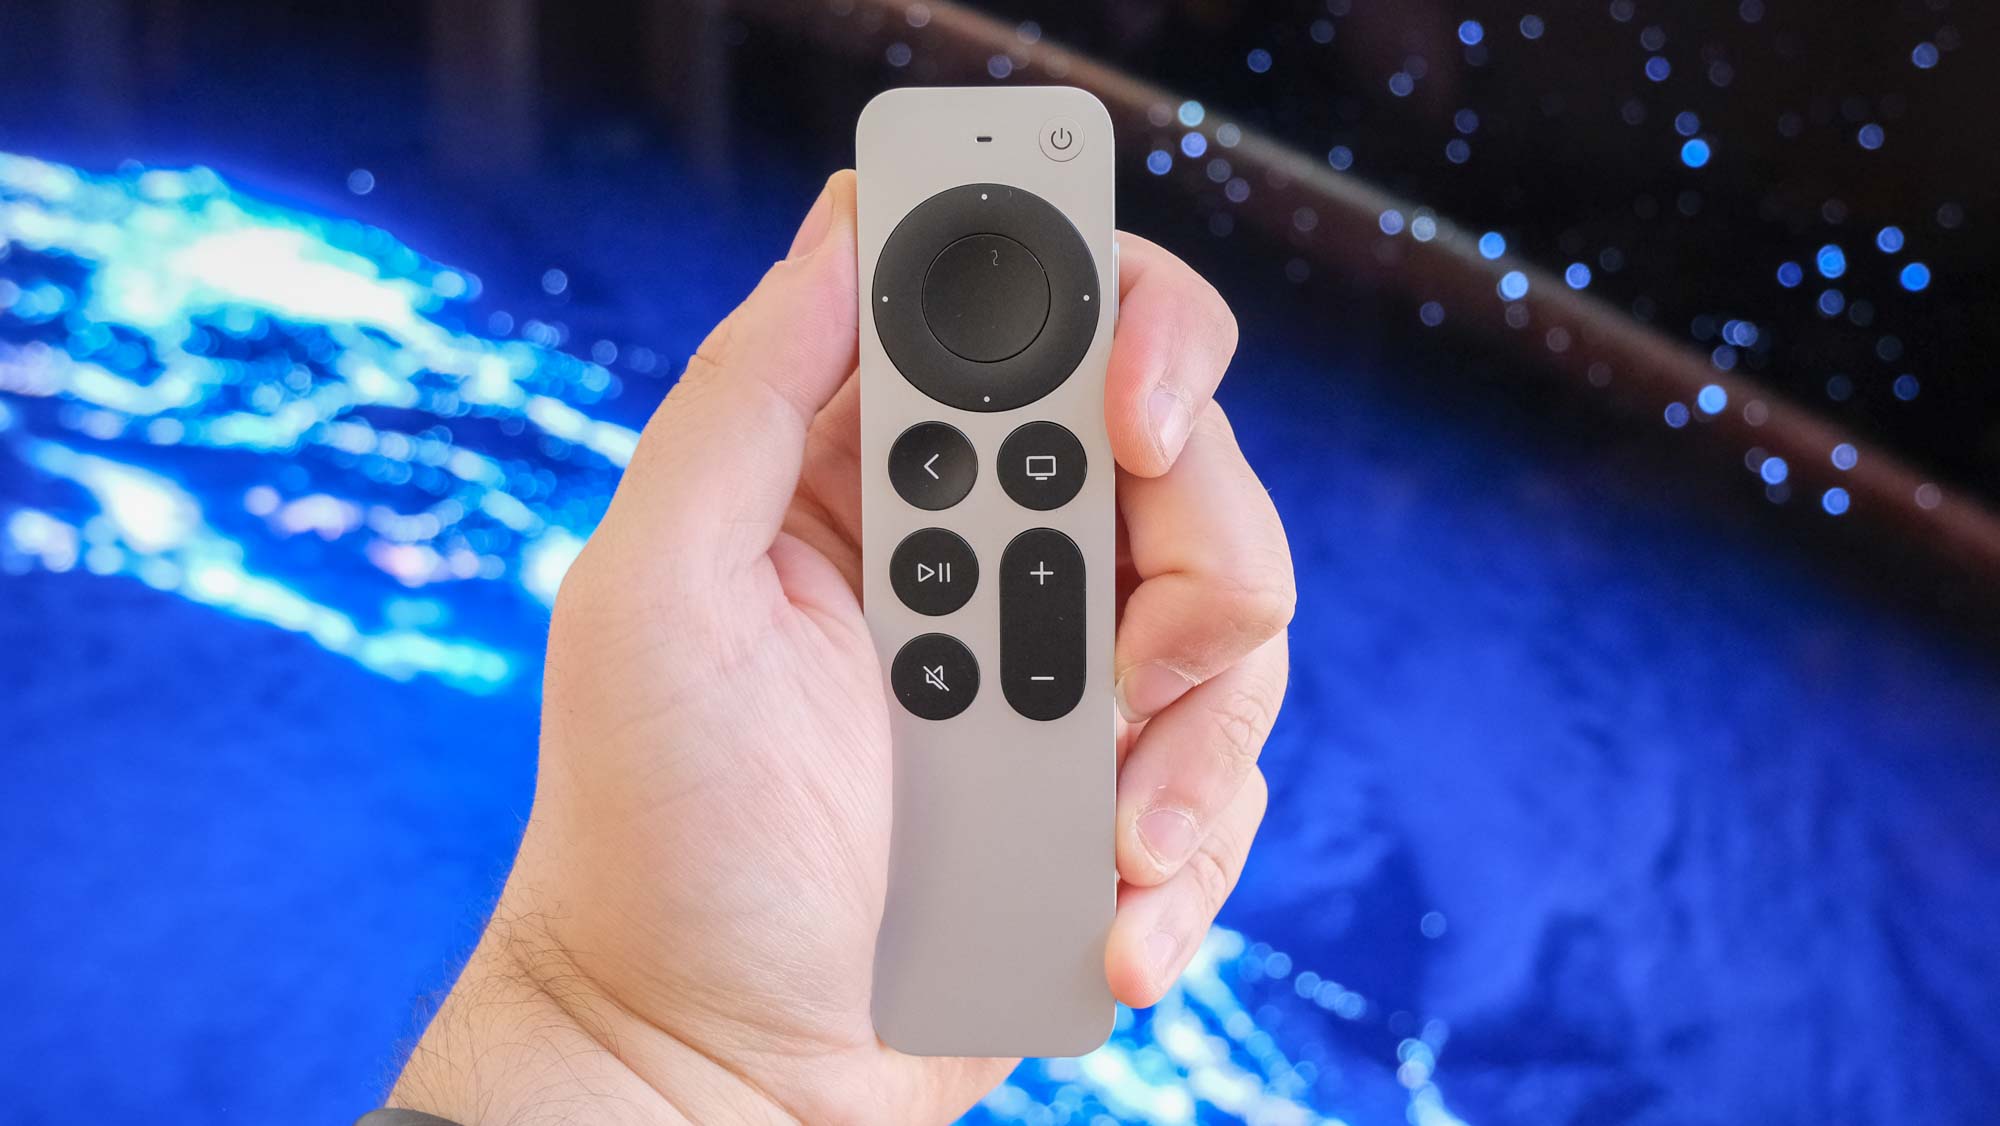 The Apple TV 4K (2022) remote in hand.